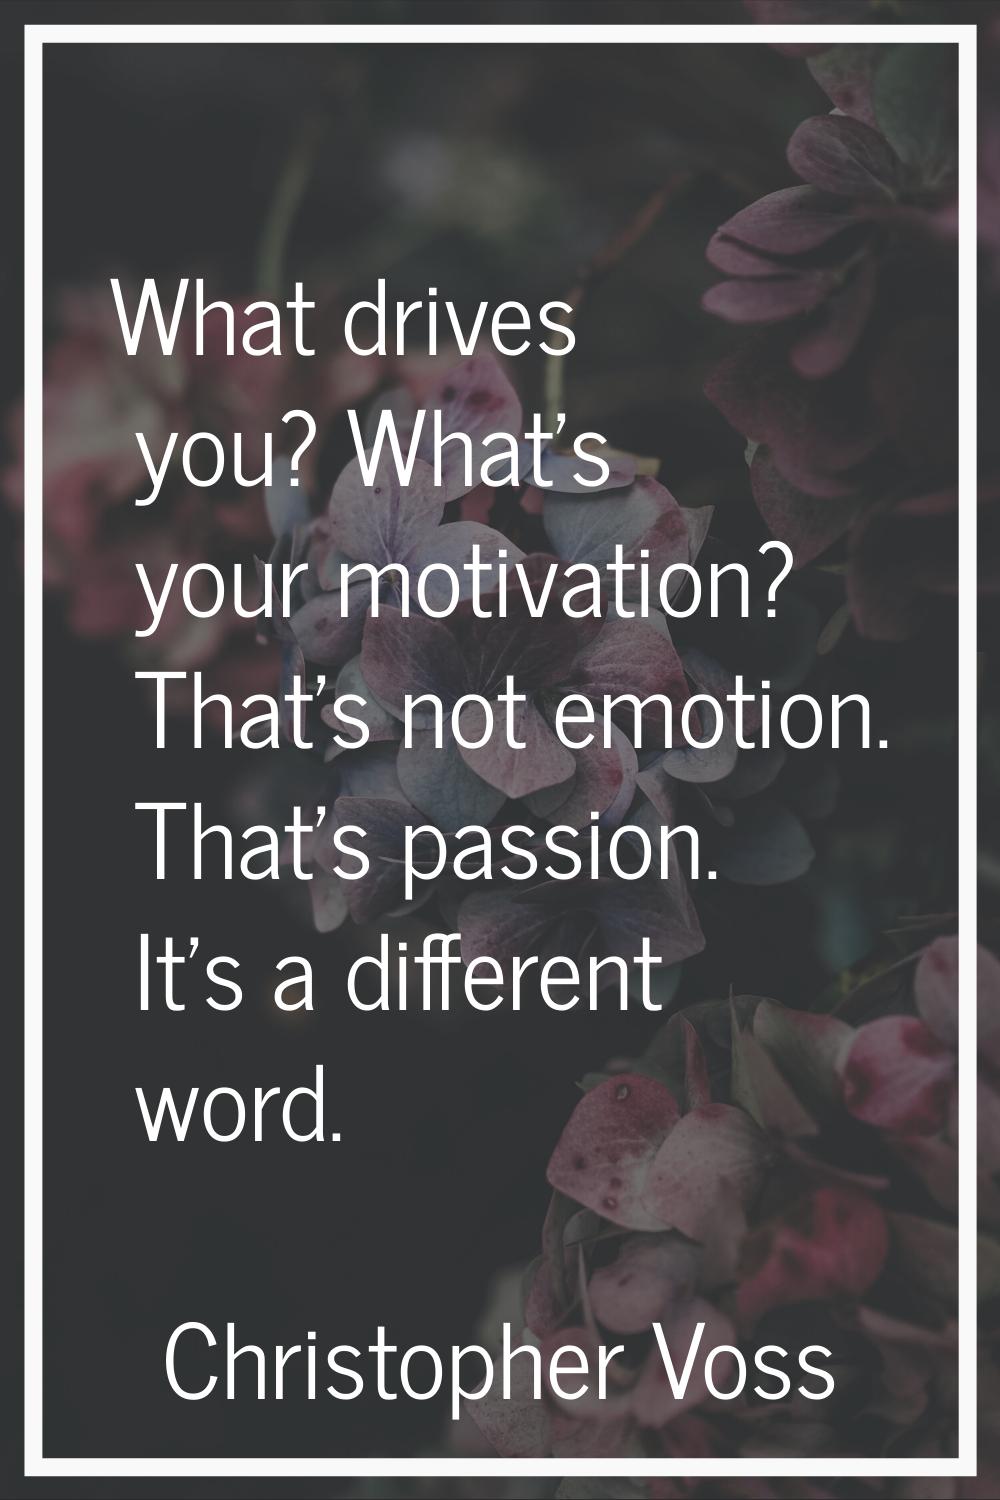 What drives you? What's your motivation? That's not emotion. That's passion. It's a different word.